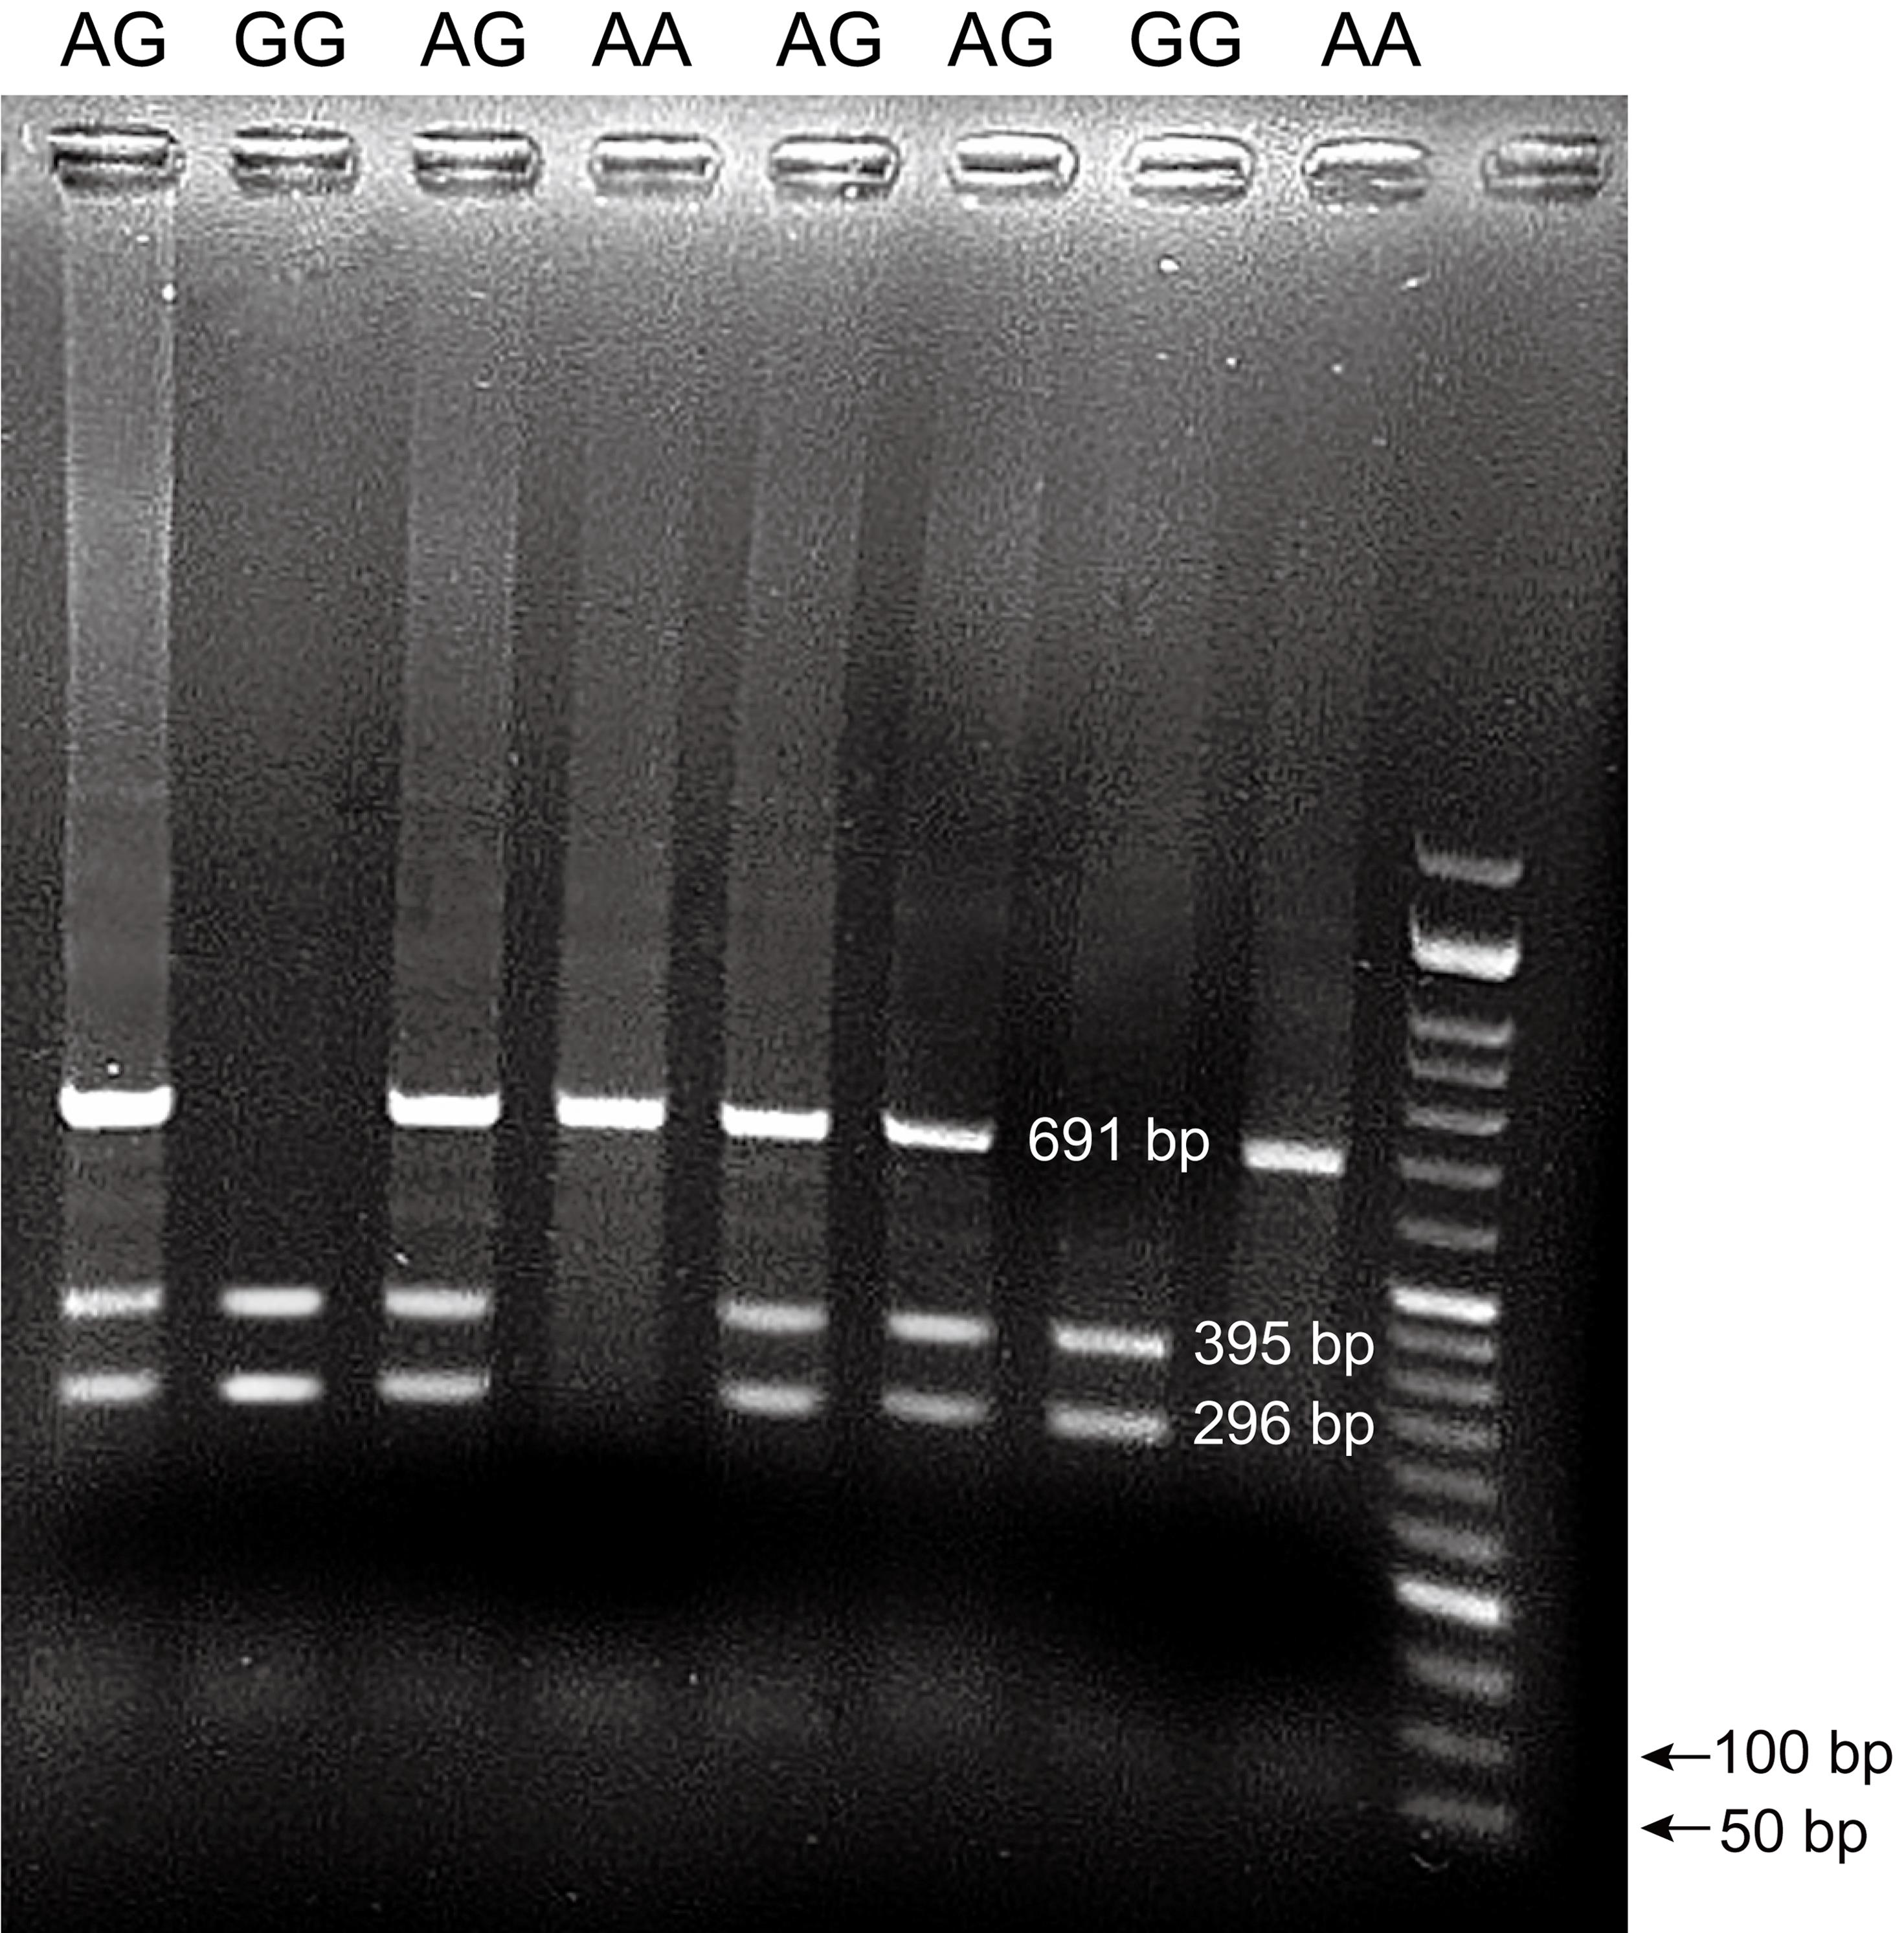 IL-27p28 (rs153109A>G) PCR product after digestion with XhoΙ enzyme.